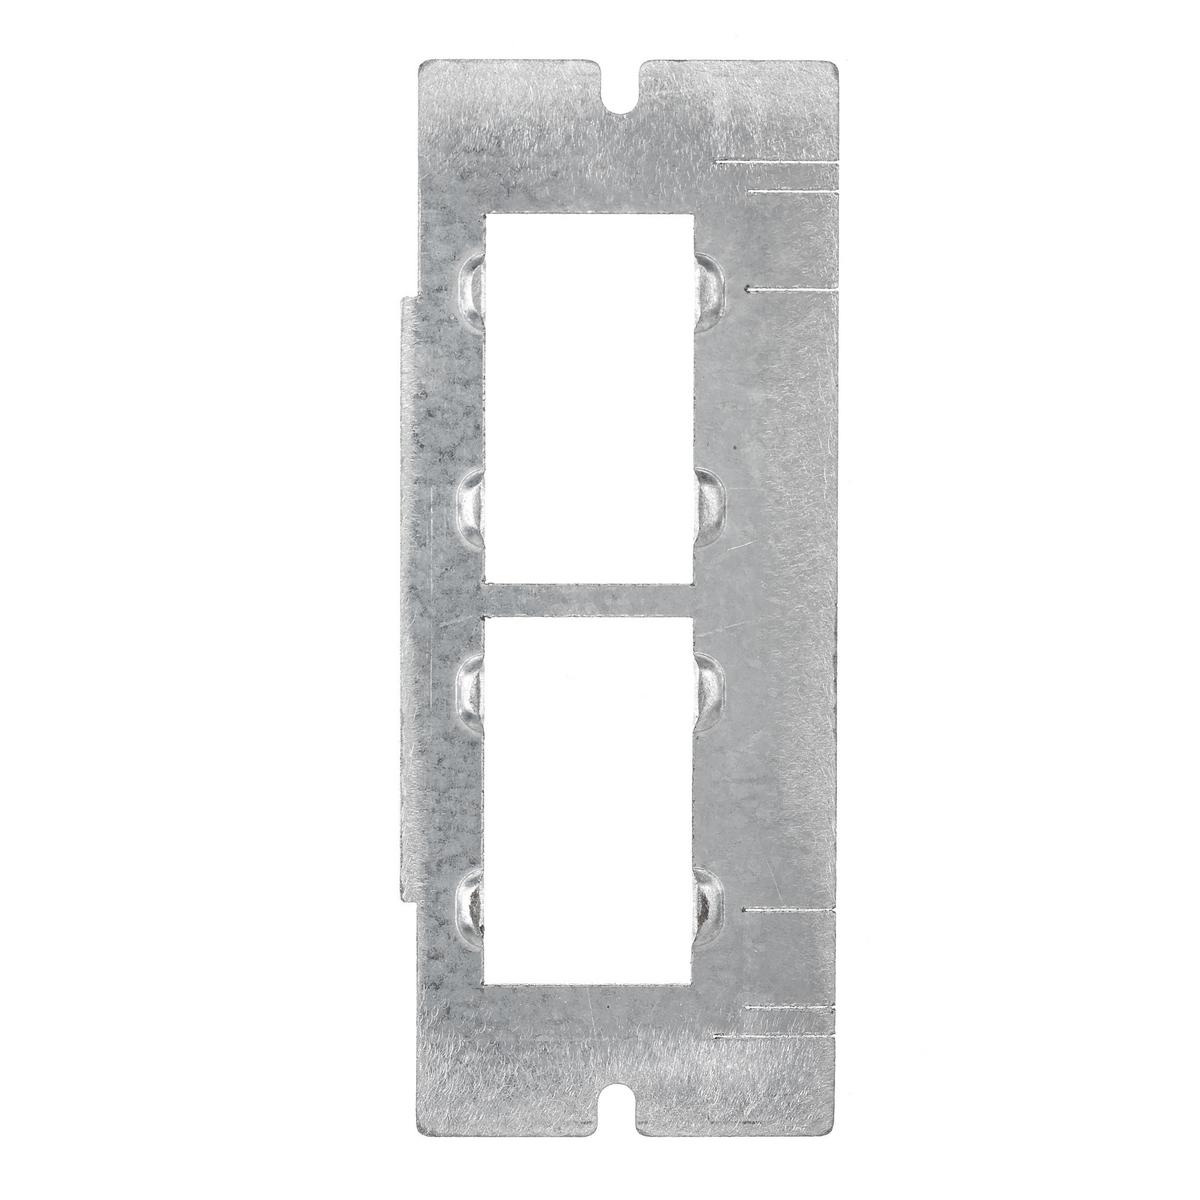 Hubbell FBMP2IM Concrete, Access, Wood Floorboxes, Recessed, 2, 4, & 6-Gang Series, Mounting Plate, 1-Gang, (2) 1 Unit Hubbell iStation Openings  ; Plate for Use in SystemOne 2, 4 & 6-Gang Recessed Floorboxes ; 1-Gang- (2) 1 Unit Hubbell iStation Opening ; Horizontial 1-